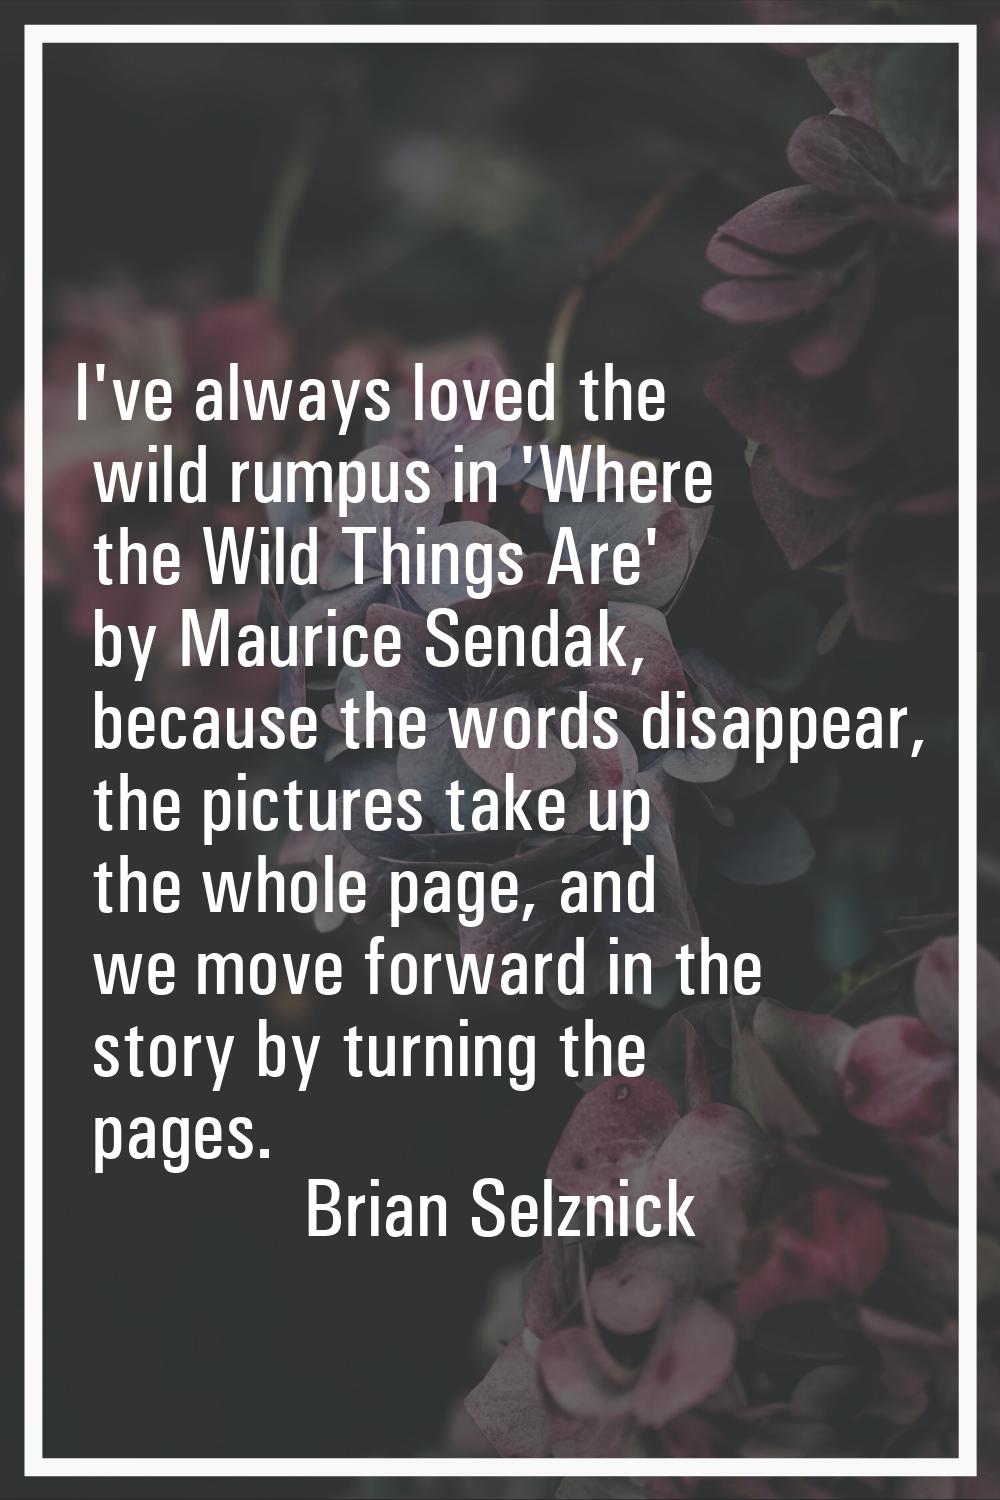 I've always loved the wild rumpus in 'Where the Wild Things Are' by Maurice Sendak, because the wor